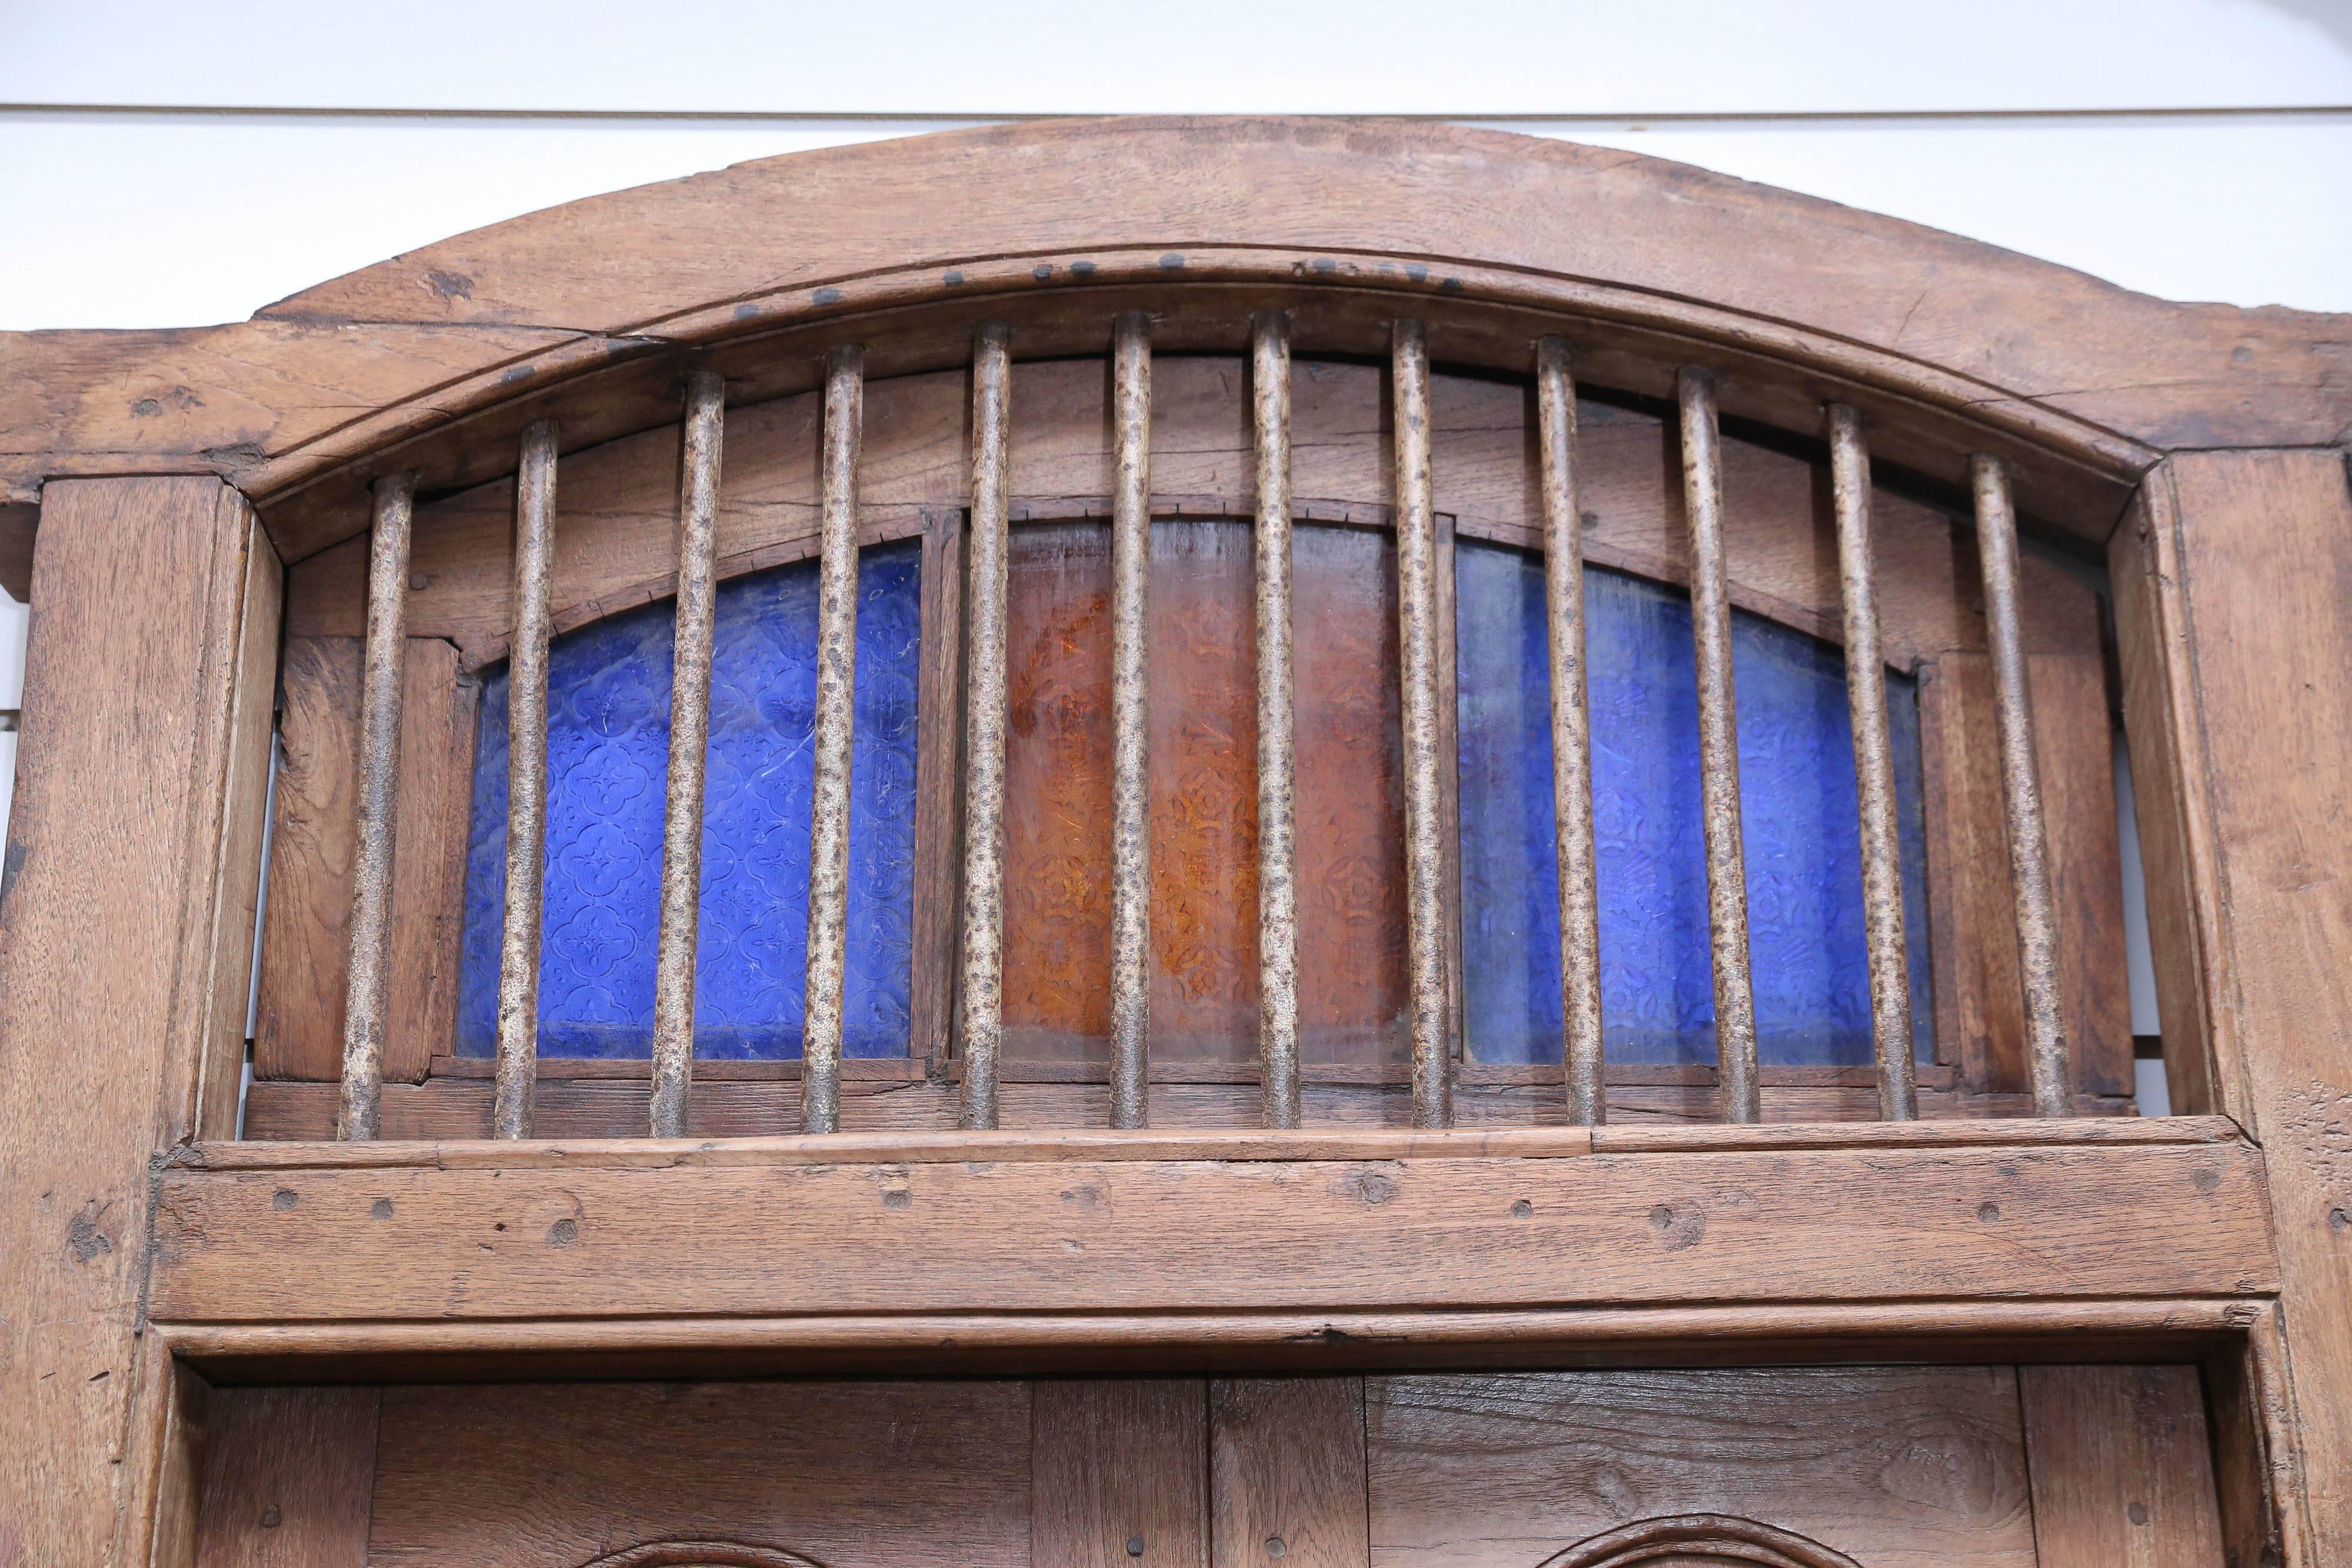 A very rare exceptionally well made solid teak wood window with original iron bars and hardware. It has shutters at the top. The churches built by the European settlers in the early 19th century are crumbling and are replaced with stronger concrete